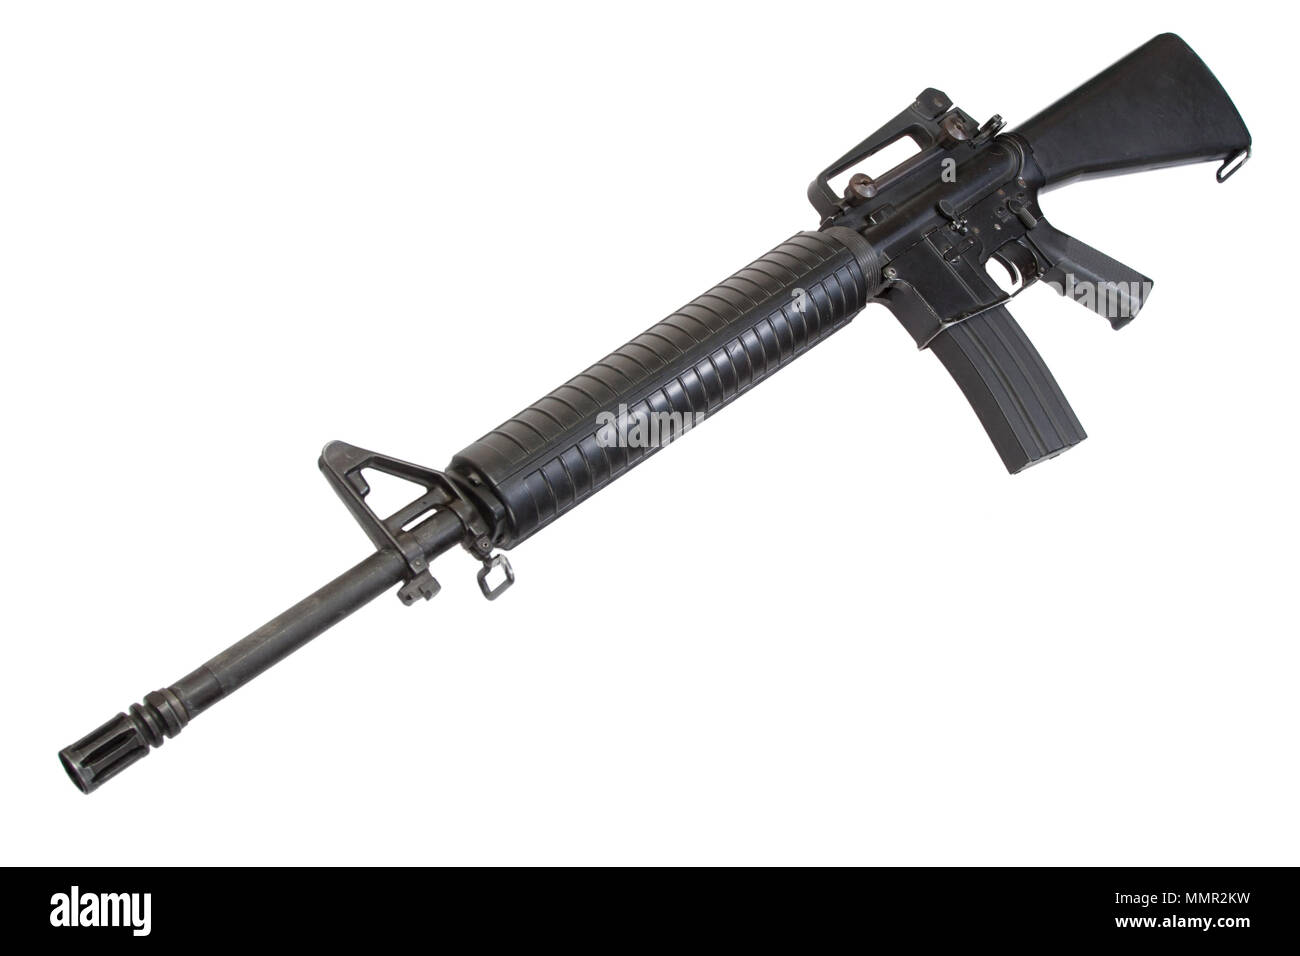 US Army service rifle M16 rifle isolated on a white background Stock Photo